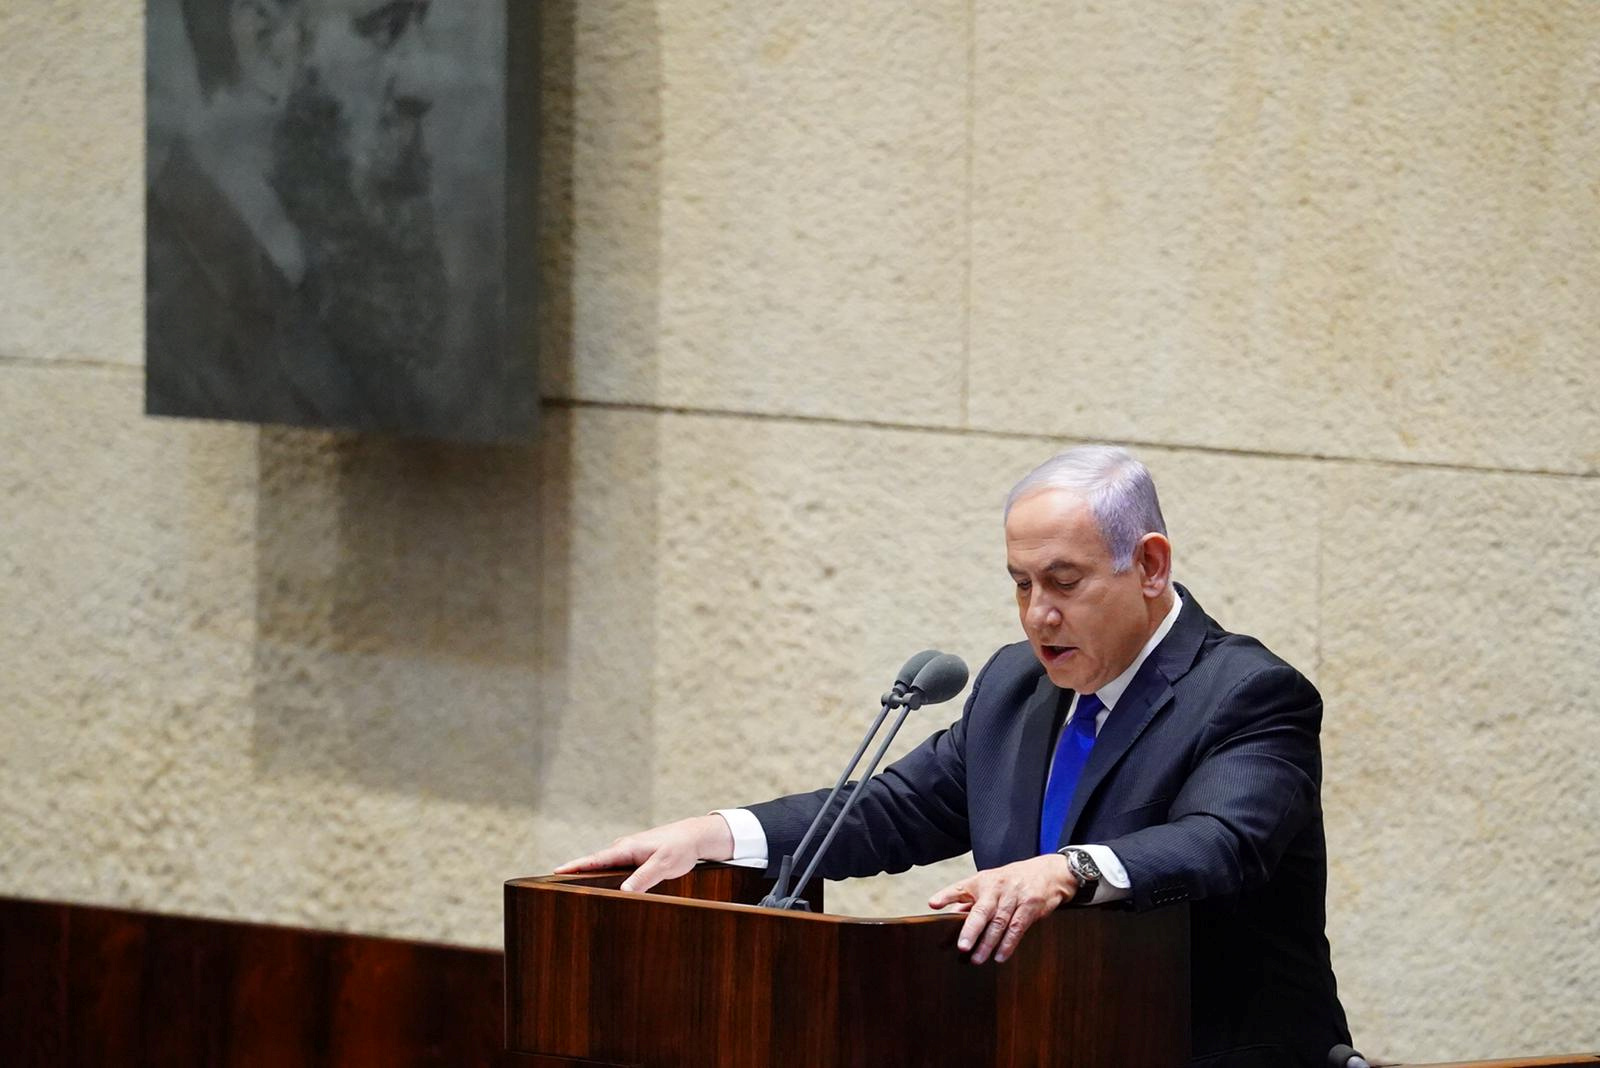 Israeli Prime Minister Netanyahu speaks during a swearing in ceremony of his new unity government at Israel's parliament in Jerusalem